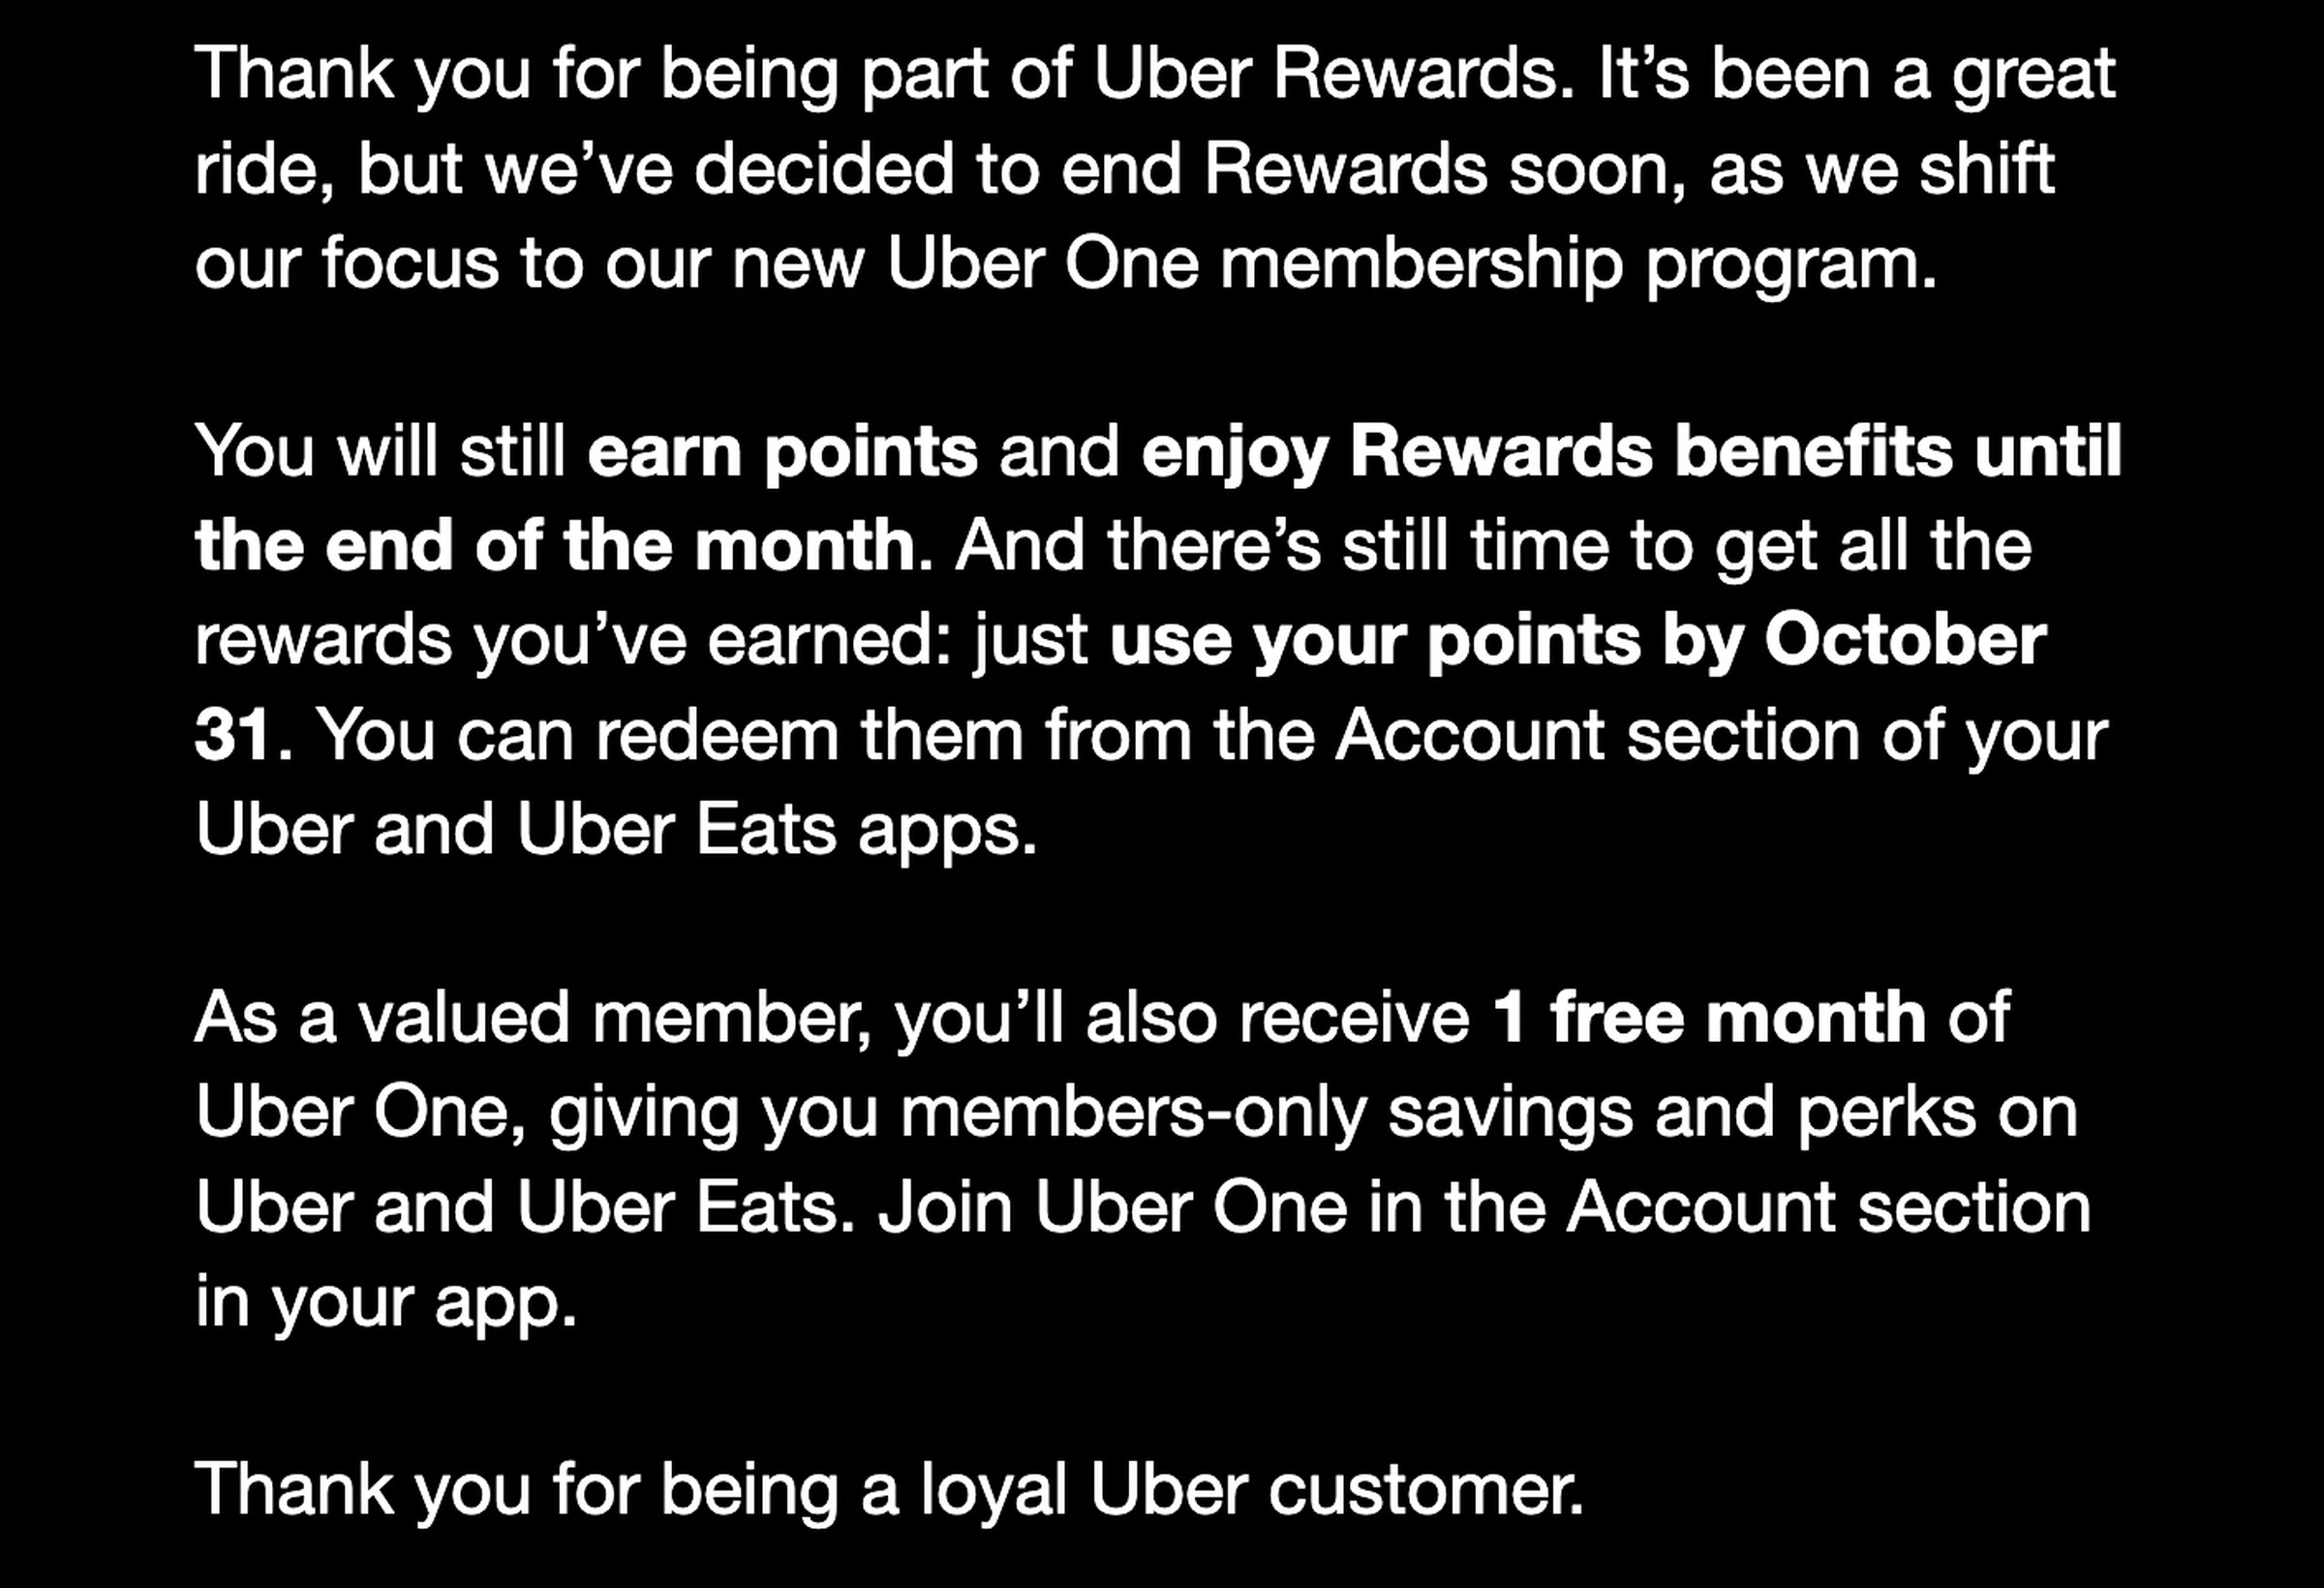 The email sent to Uber Rewards users.